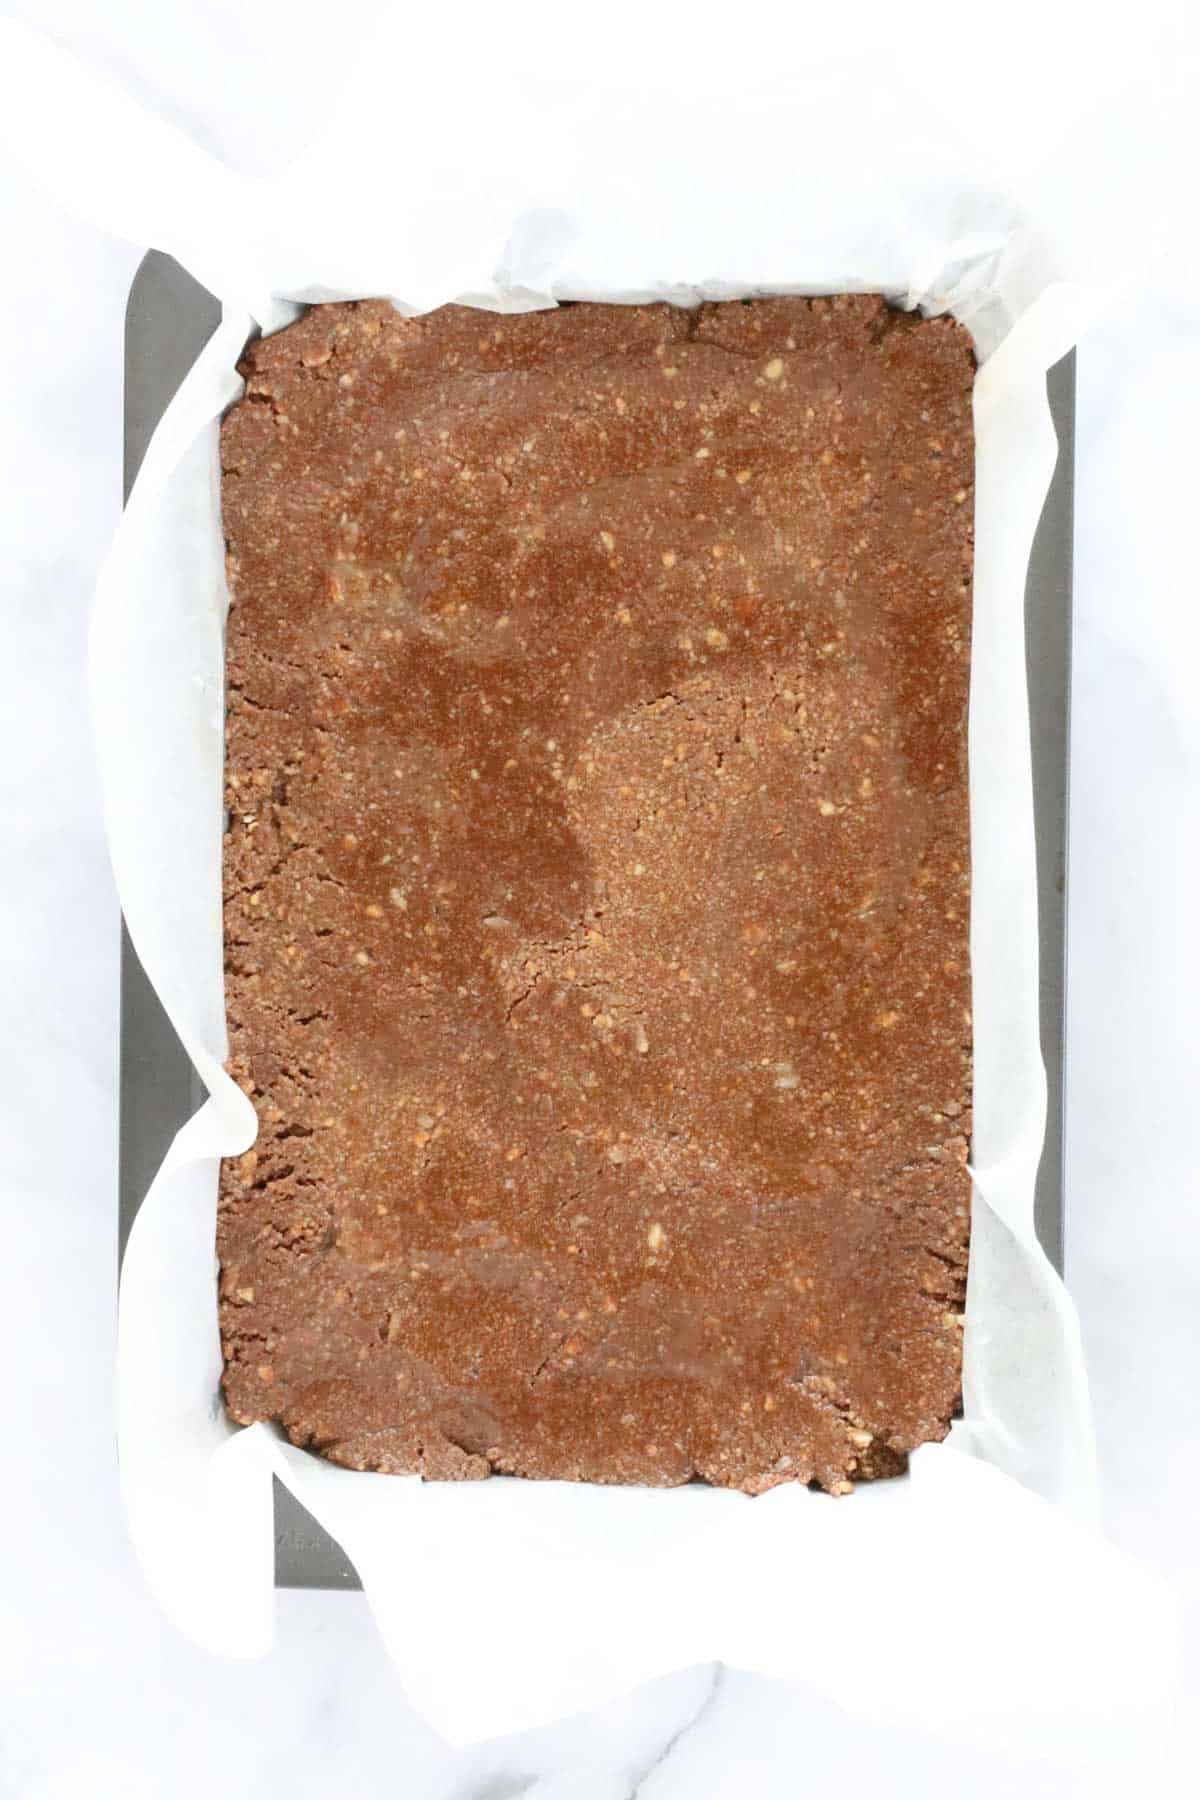 Chocolate slice mixture pressed into a tin.